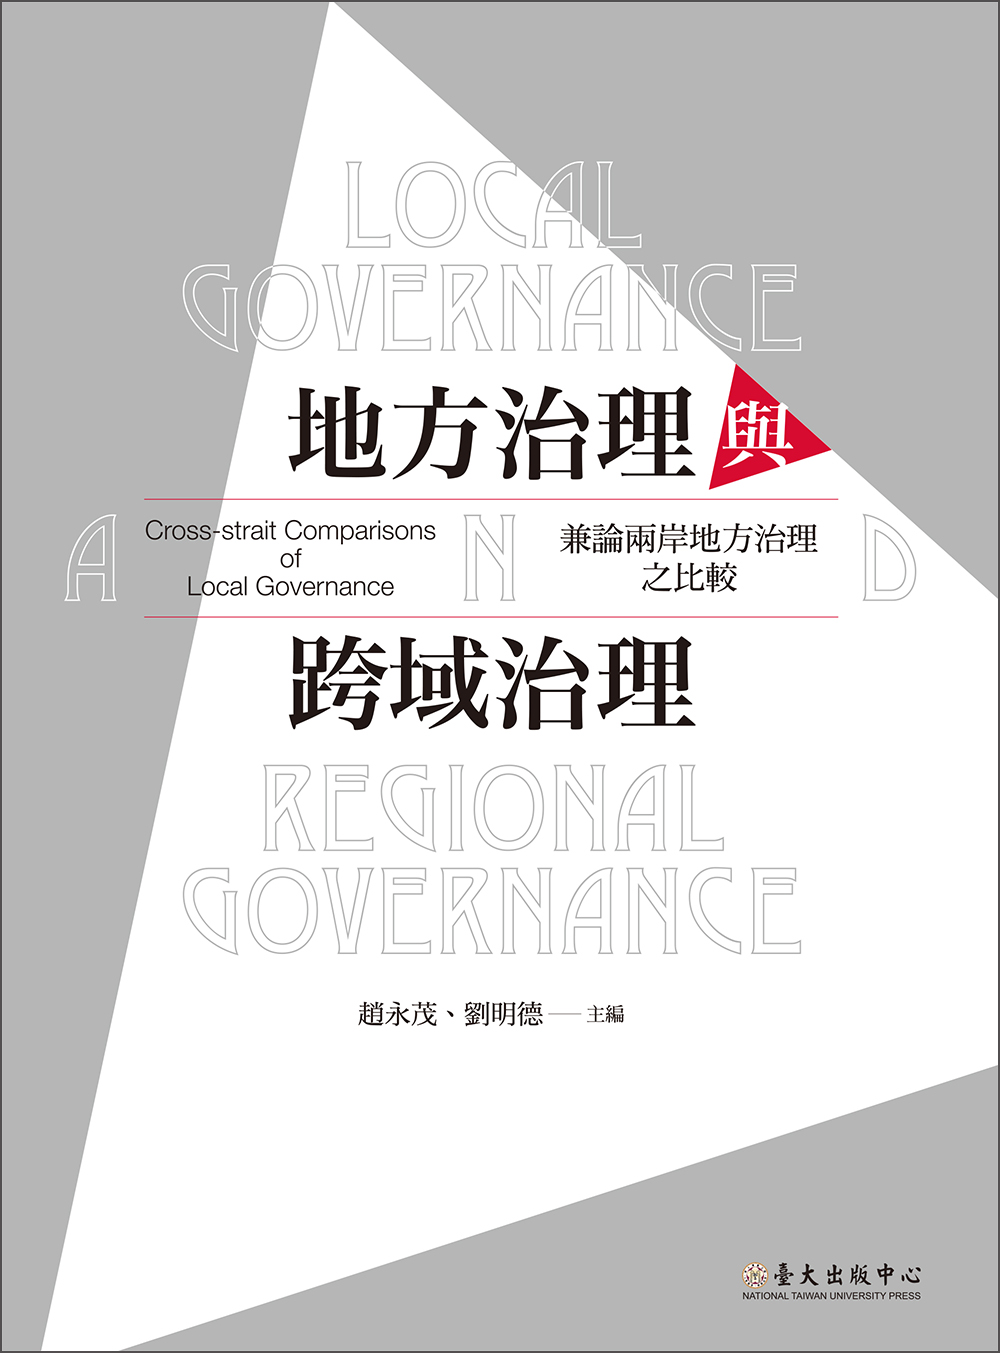 Local Governance and Regional Governance: Cross-strait Comparisons of Local Governance